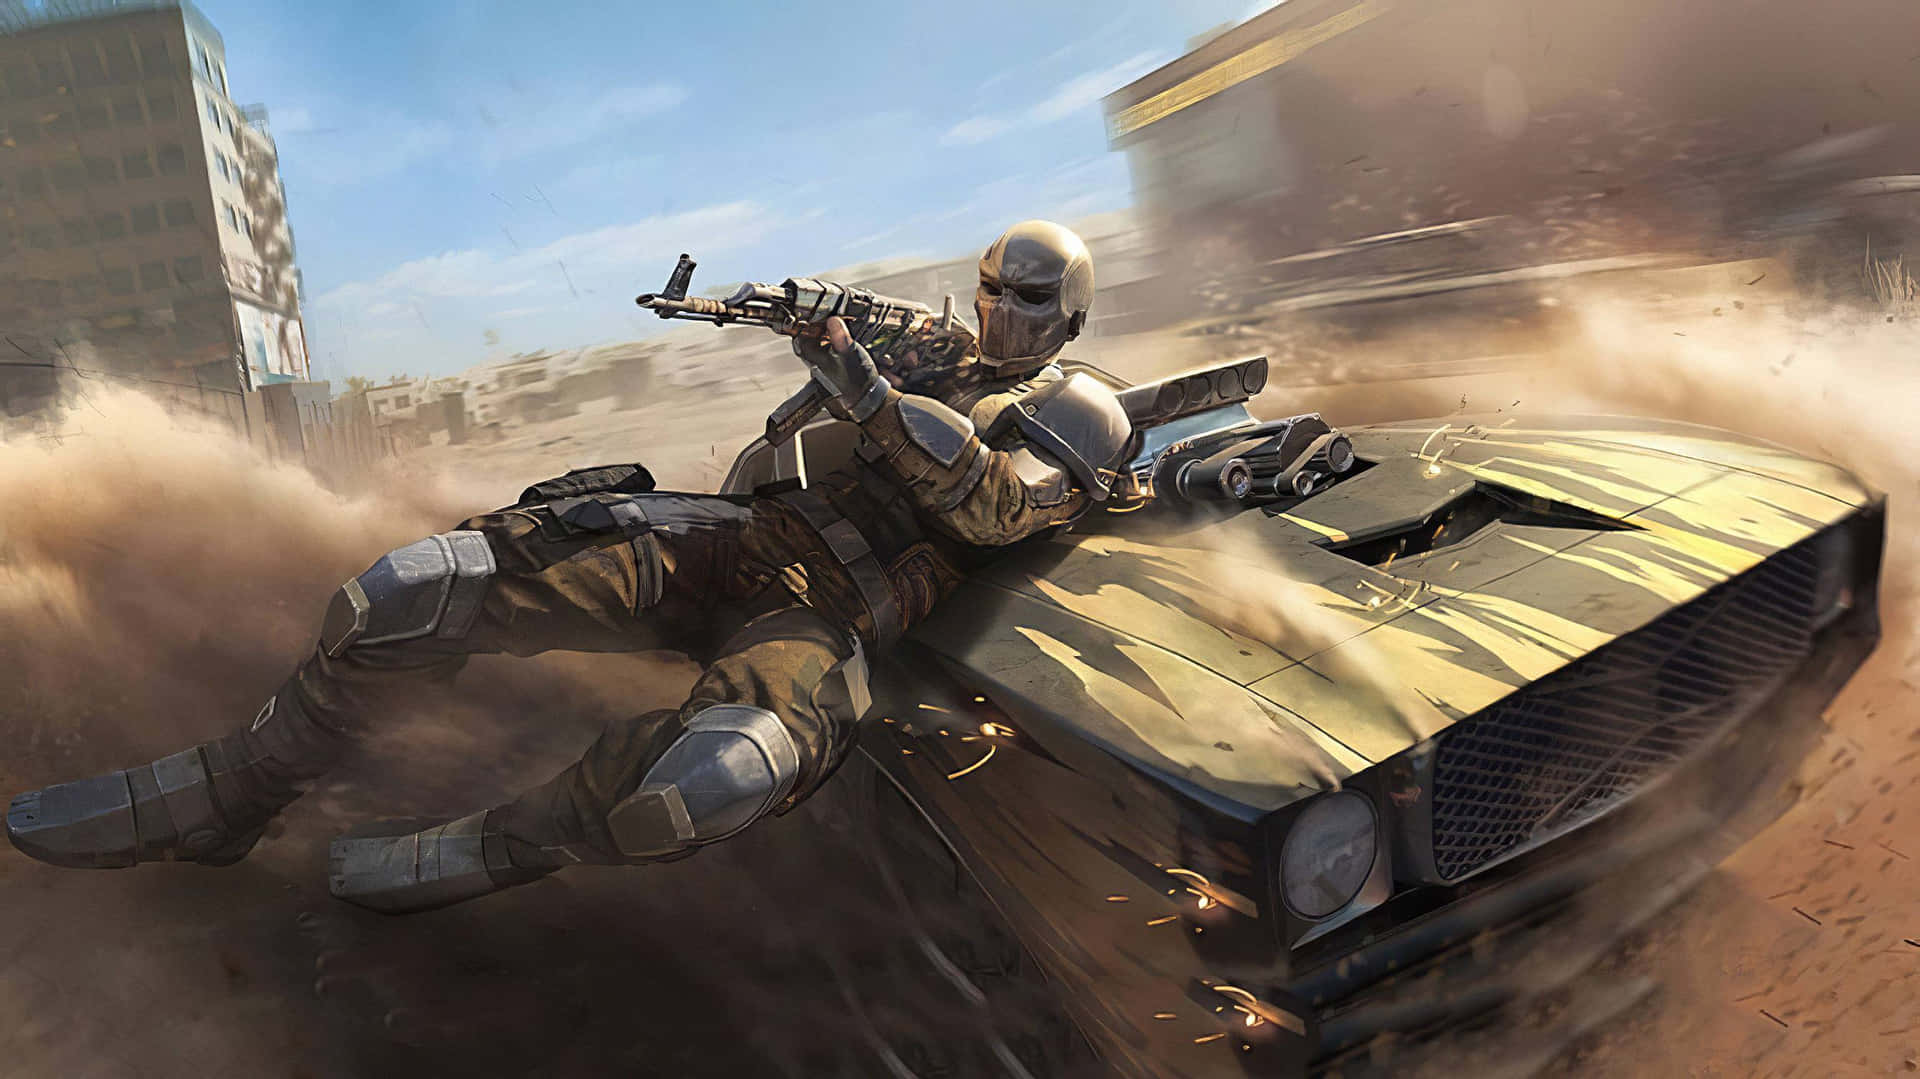 Pubg New State Soldier Leaning A Moving Car Wallpaper